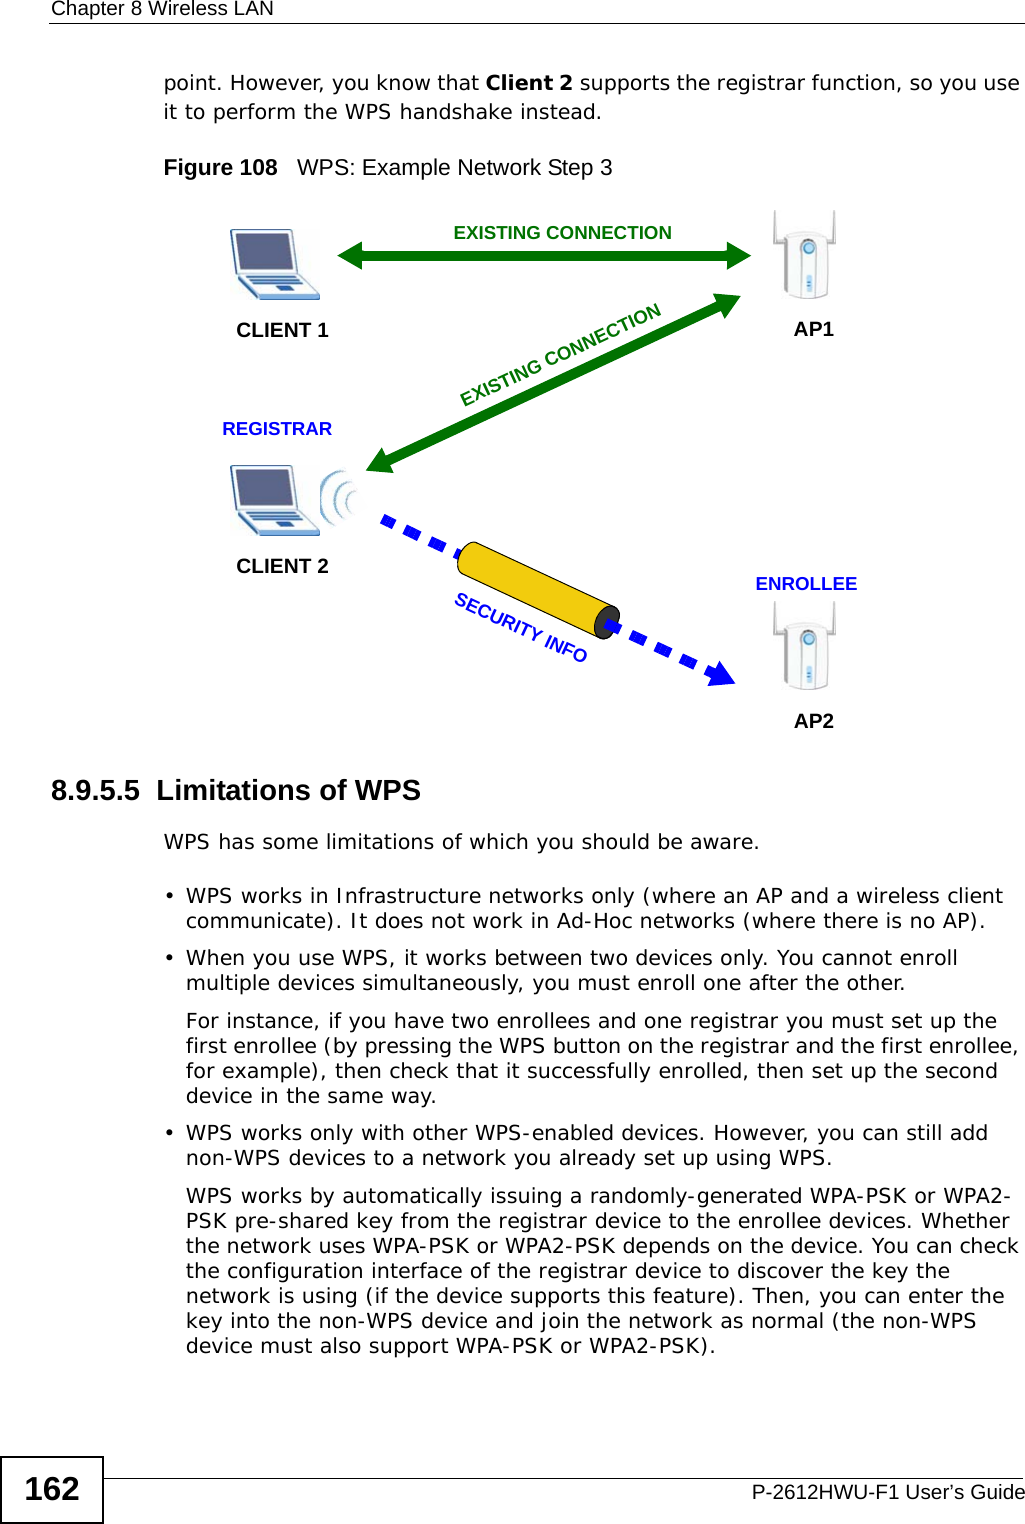 Chapter 8 Wireless LANP-2612HWU-F1 User’s Guide162point. However, you know that Client 2 supports the registrar function, so you use it to perform the WPS handshake instead.Figure 108   WPS: Example Network Step 38.9.5.5  Limitations of WPSWPS has some limitations of which you should be aware. • WPS works in Infrastructure networks only (where an AP and a wireless client communicate). It does not work in Ad-Hoc networks (where there is no AP).• When you use WPS, it works between two devices only. You cannot enroll multiple devices simultaneously, you must enroll one after the other. For instance, if you have two enrollees and one registrar you must set up the first enrollee (by pressing the WPS button on the registrar and the first enrollee, for example), then check that it successfully enrolled, then set up the second device in the same way.• WPS works only with other WPS-enabled devices. However, you can still add non-WPS devices to a network you already set up using WPS. WPS works by automatically issuing a randomly-generated WPA-PSK or WPA2-PSK pre-shared key from the registrar device to the enrollee devices. Whether the network uses WPA-PSK or WPA2-PSK depends on the device. You can check the configuration interface of the registrar device to discover the key the network is using (if the device supports this feature). Then, you can enter the key into the non-WPS device and join the network as normal (the non-WPS device must also support WPA-PSK or WPA2-PSK).CLIENT 1 AP1REGISTRARCLIENT 2EXISTING CONNECTIONSECURITY INFOENROLLEEAP2EXISTING CONNECTION